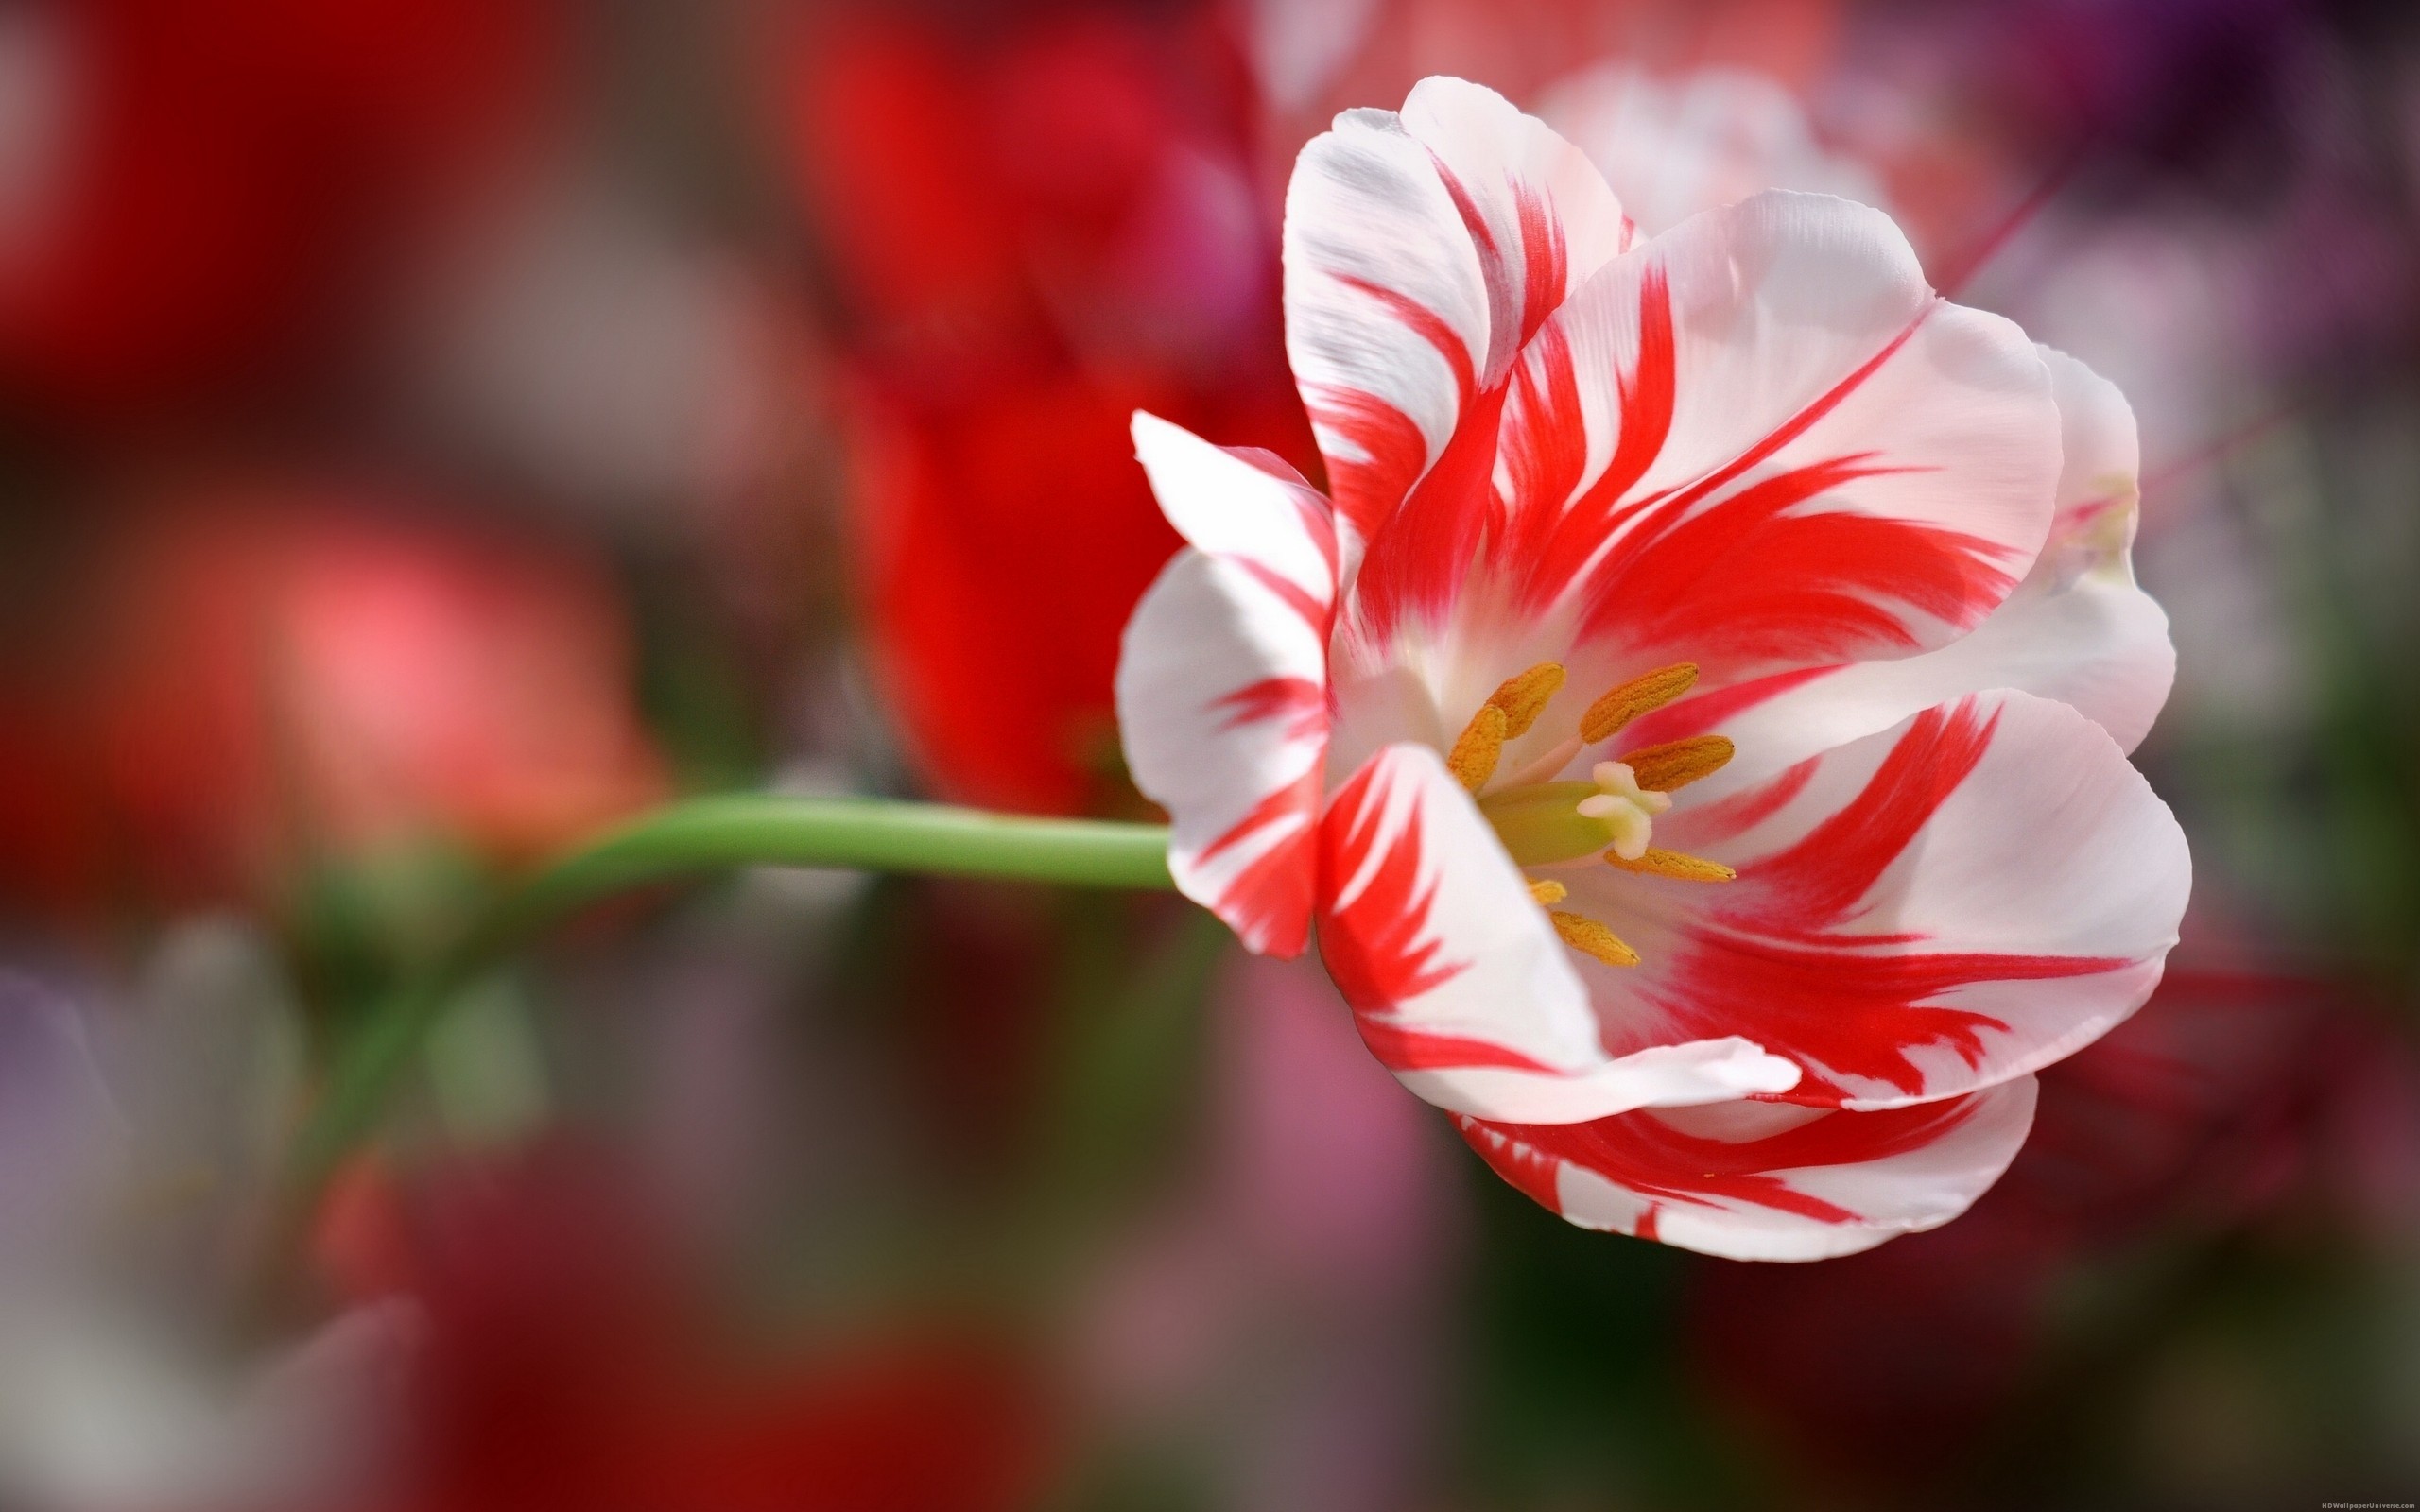 2560x1600 Red and white tulip HD Wallpaper - http://www.hdwallpaperuniverse.com